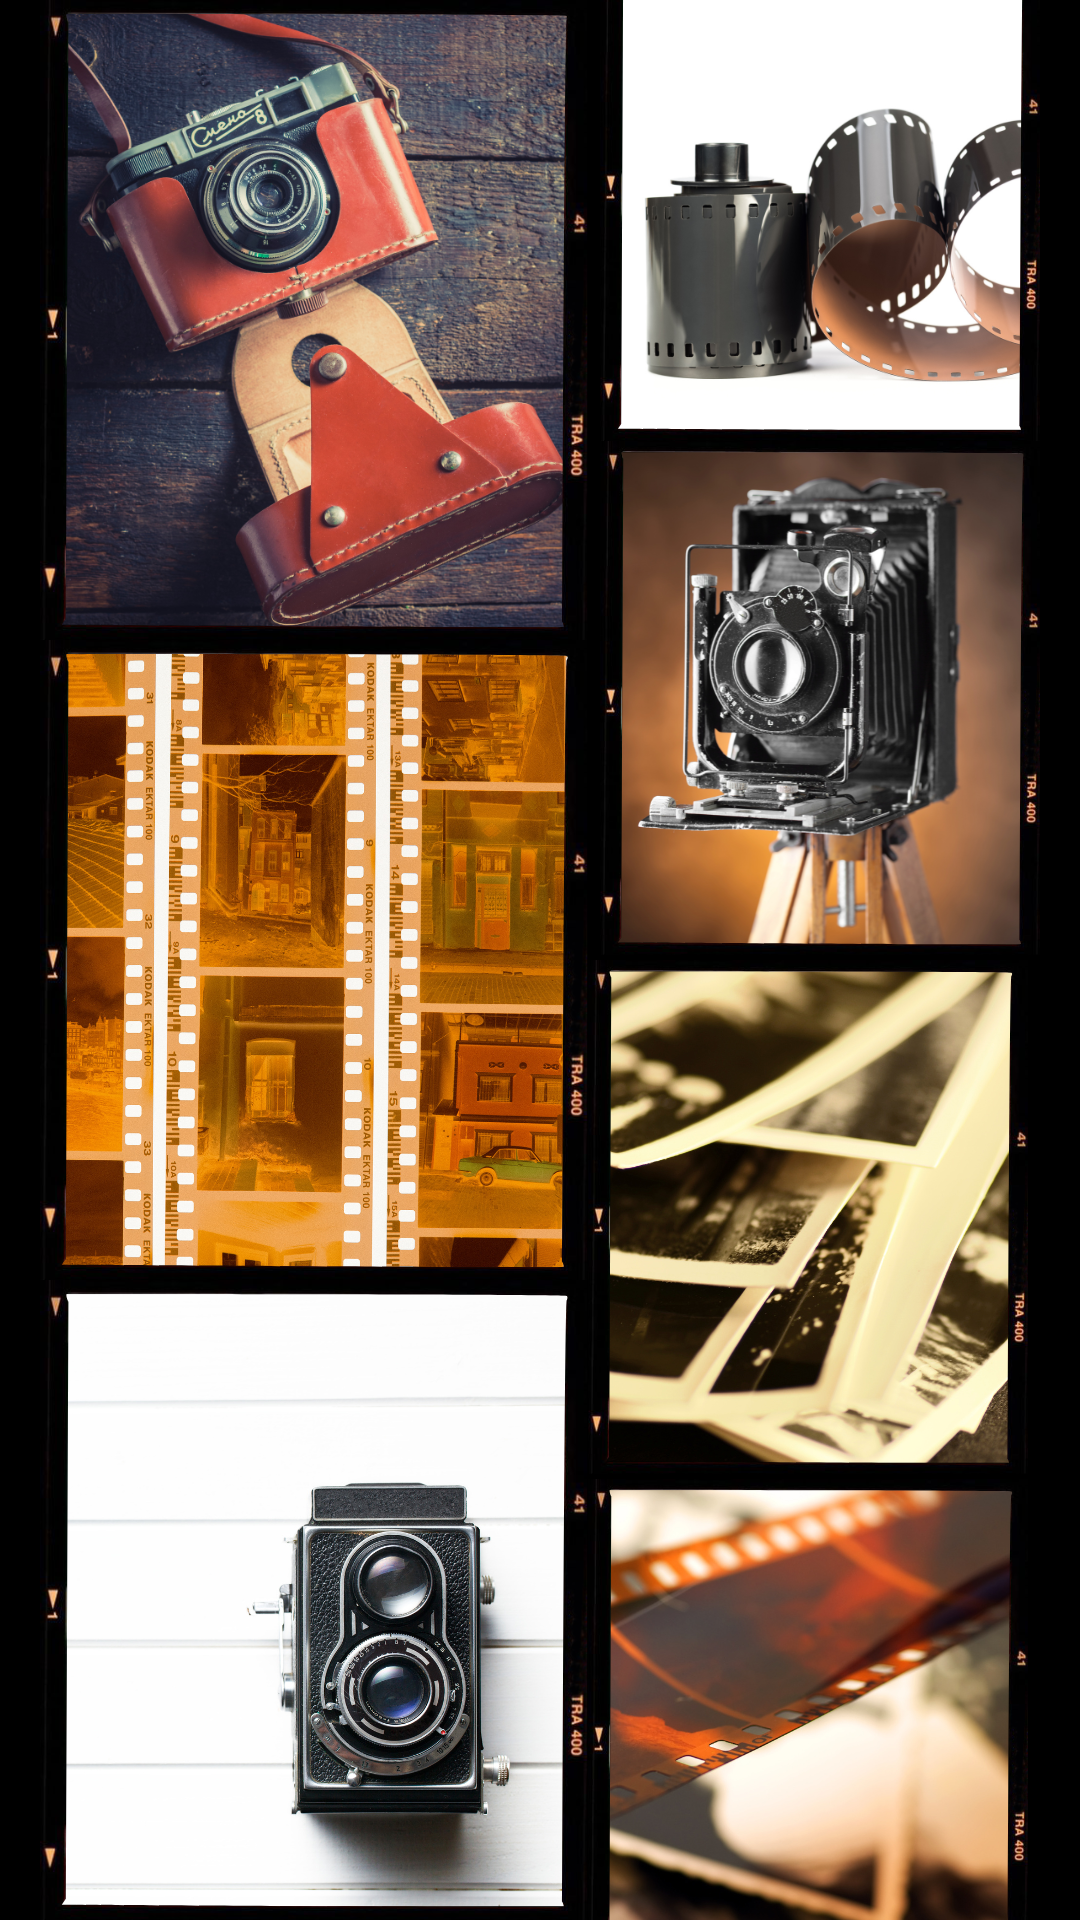 Retro Photography Tip #1: Delving into Film Photography and Old Film Cameras to Capture Their Style